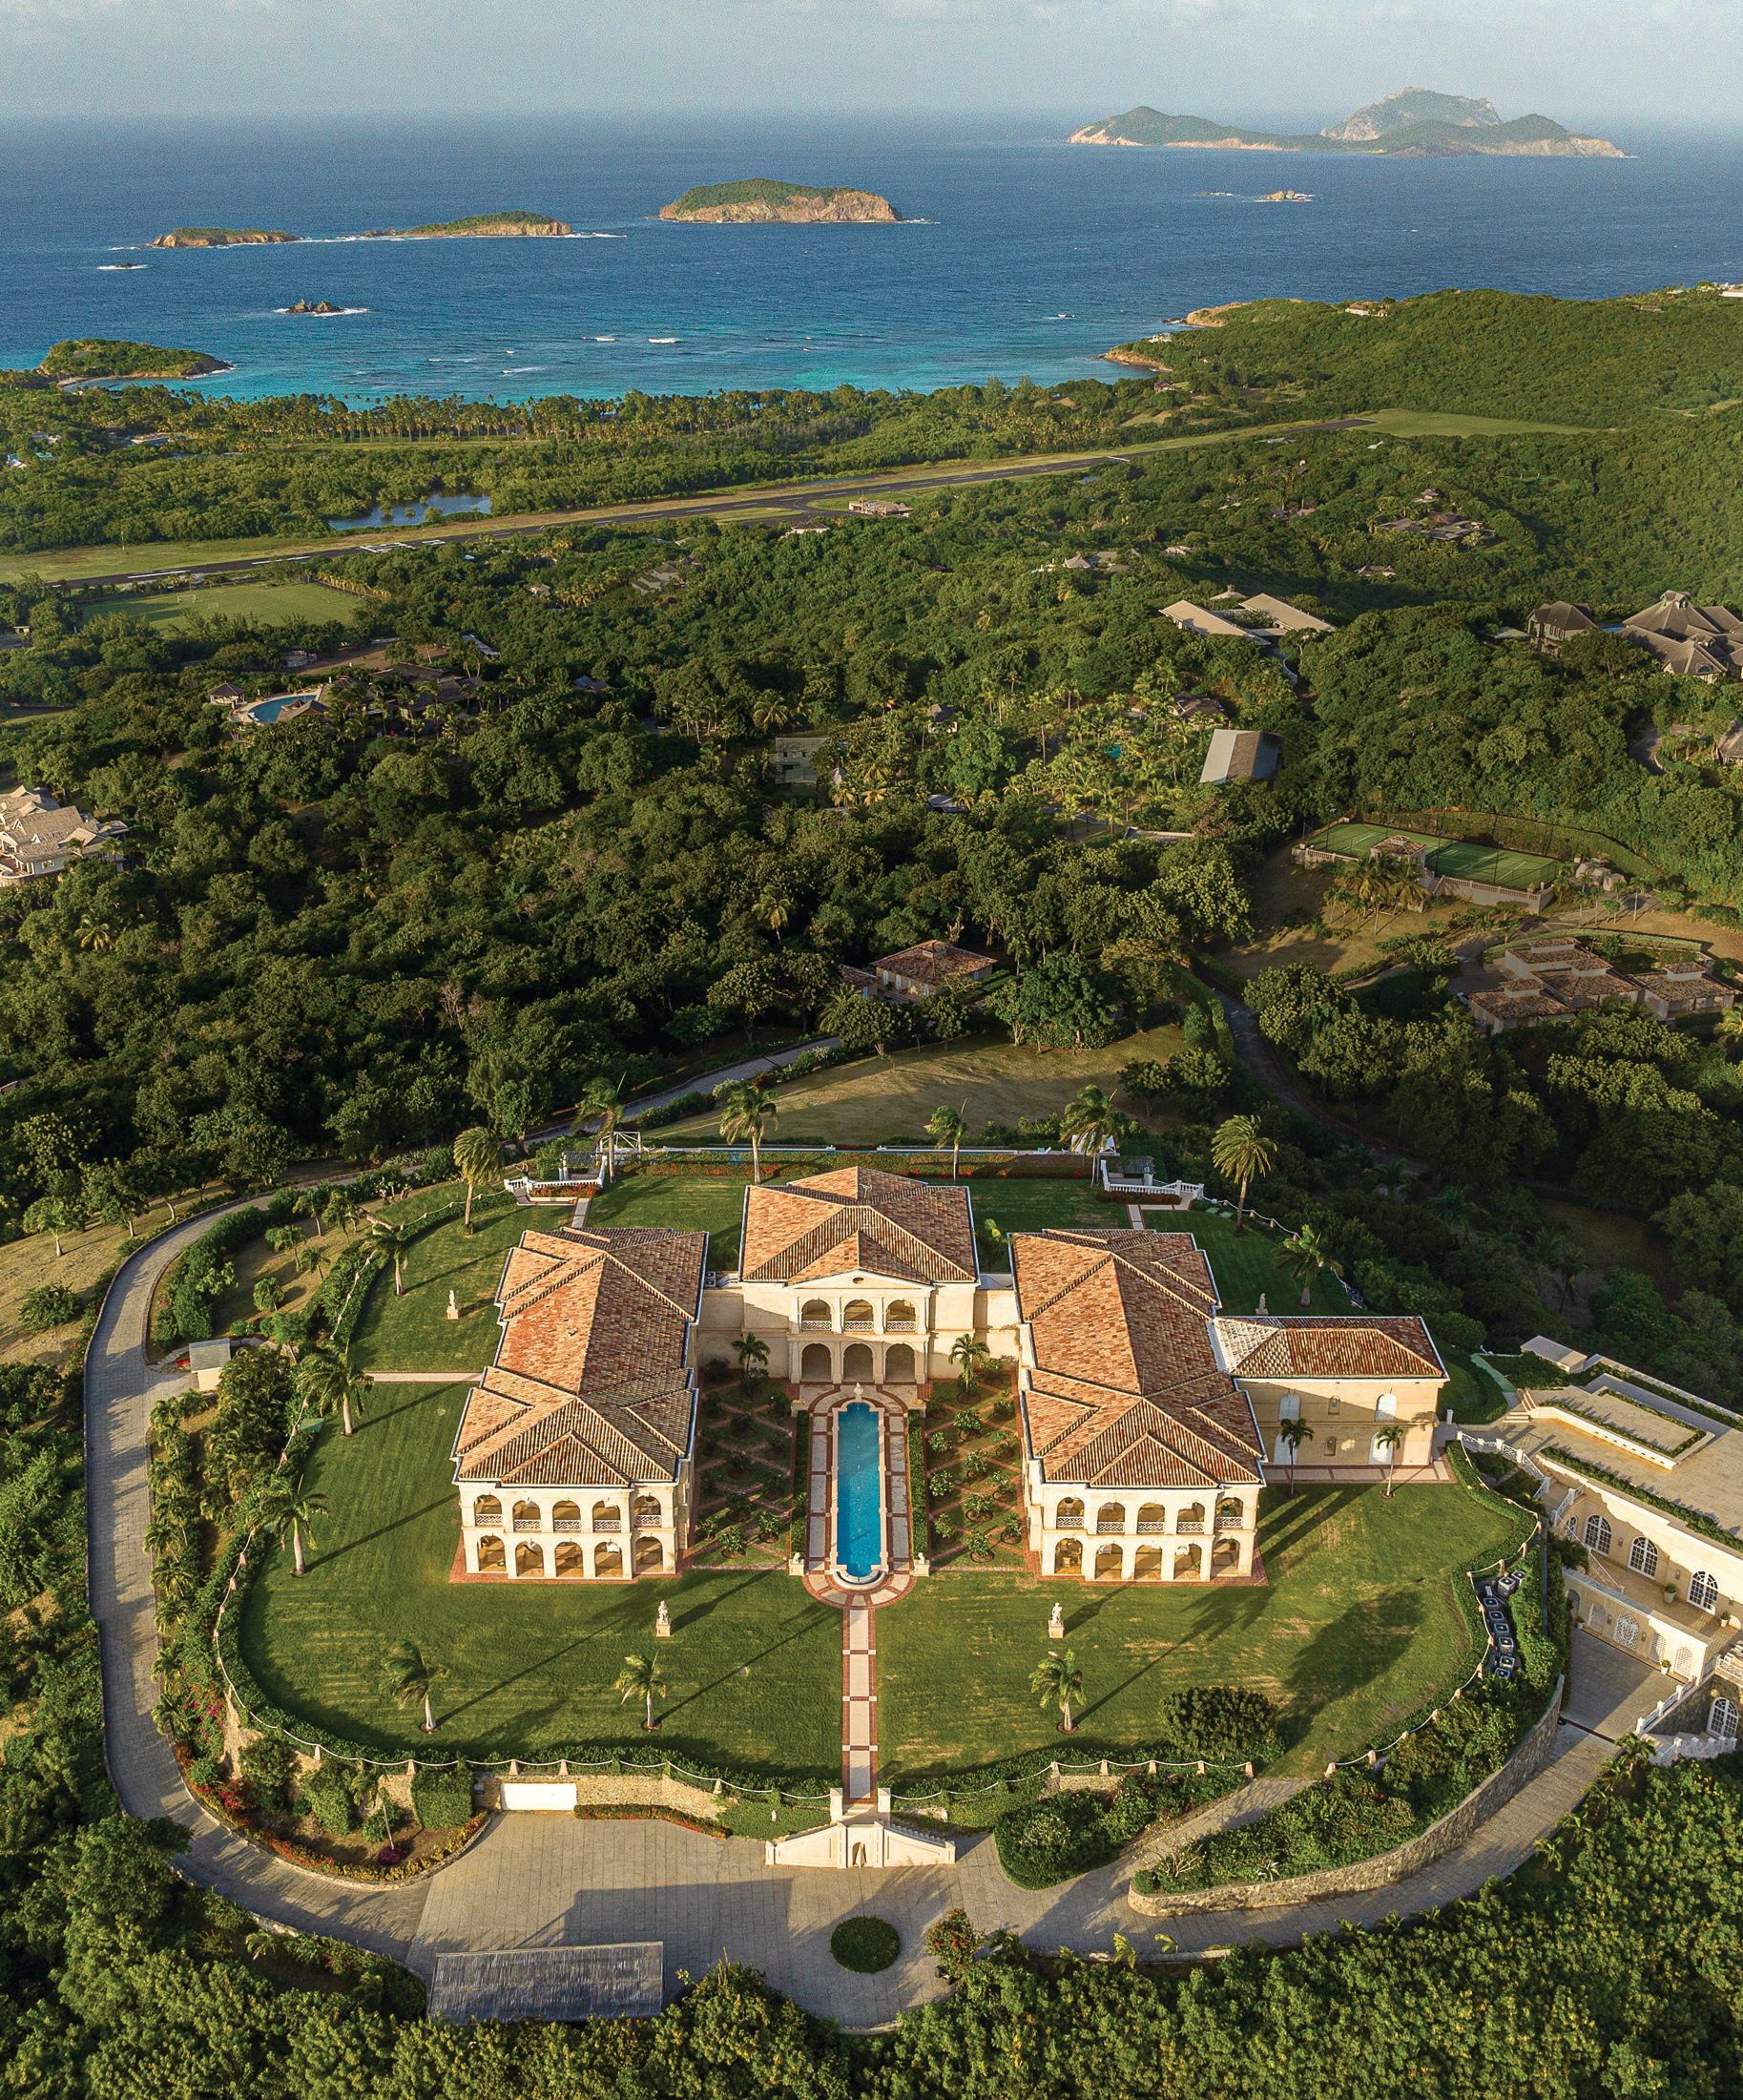 For the first time, guests can rent the 17-acre, nine-bedroom estate The Terraces in Mustique. PHOTO COURTESY OF MUSTIQUE